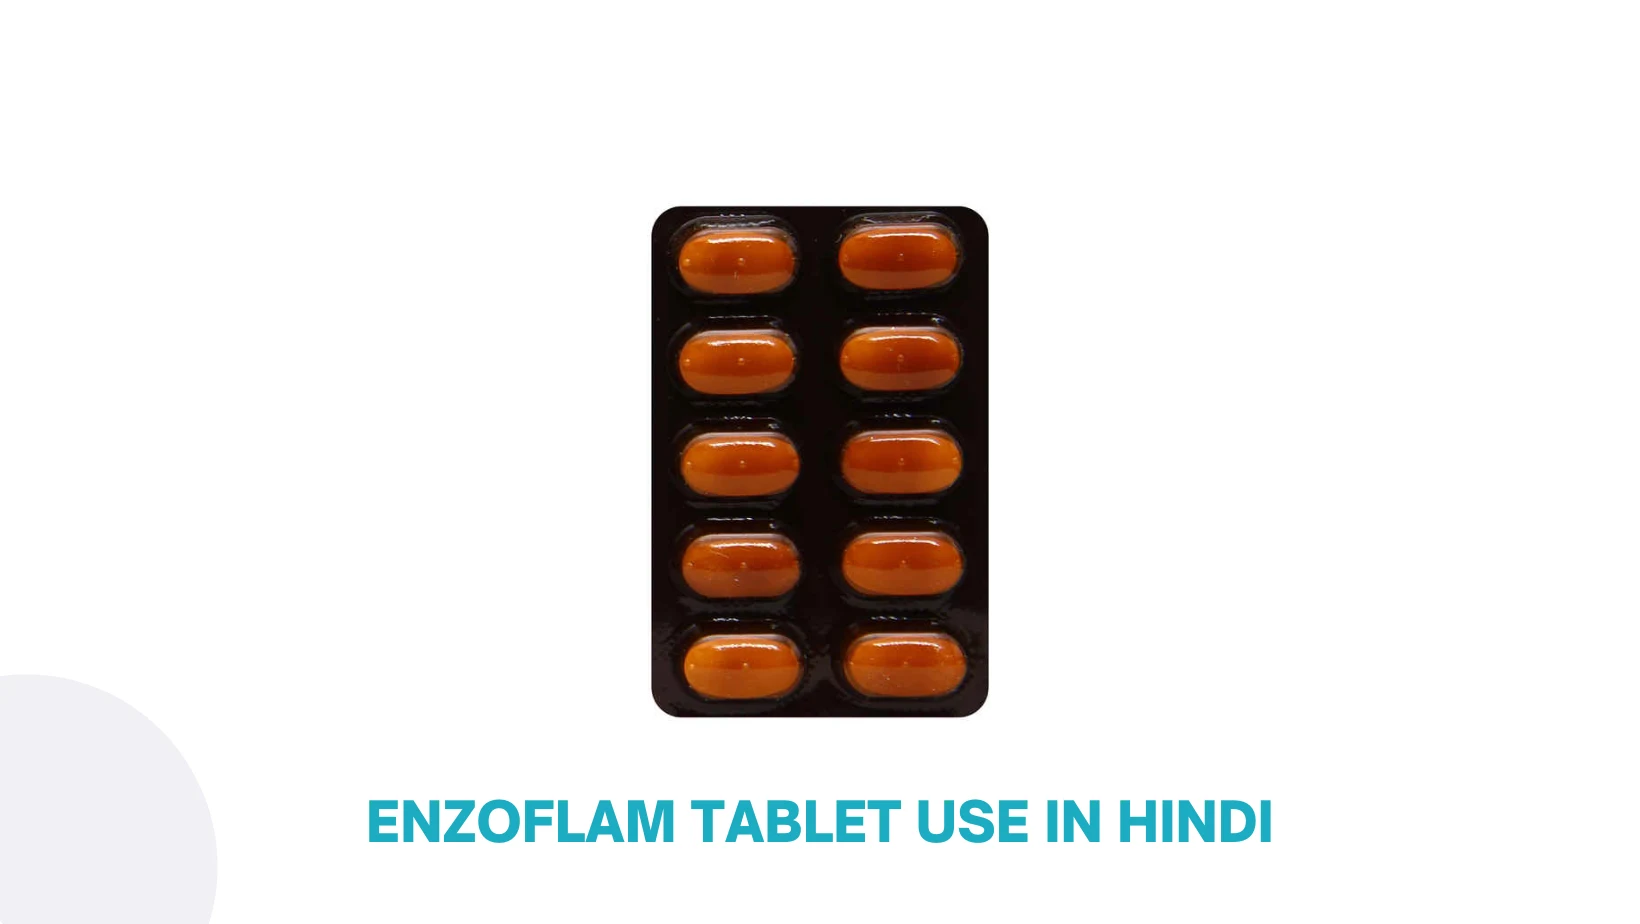 Enzoflam Tablet Use In Hindi